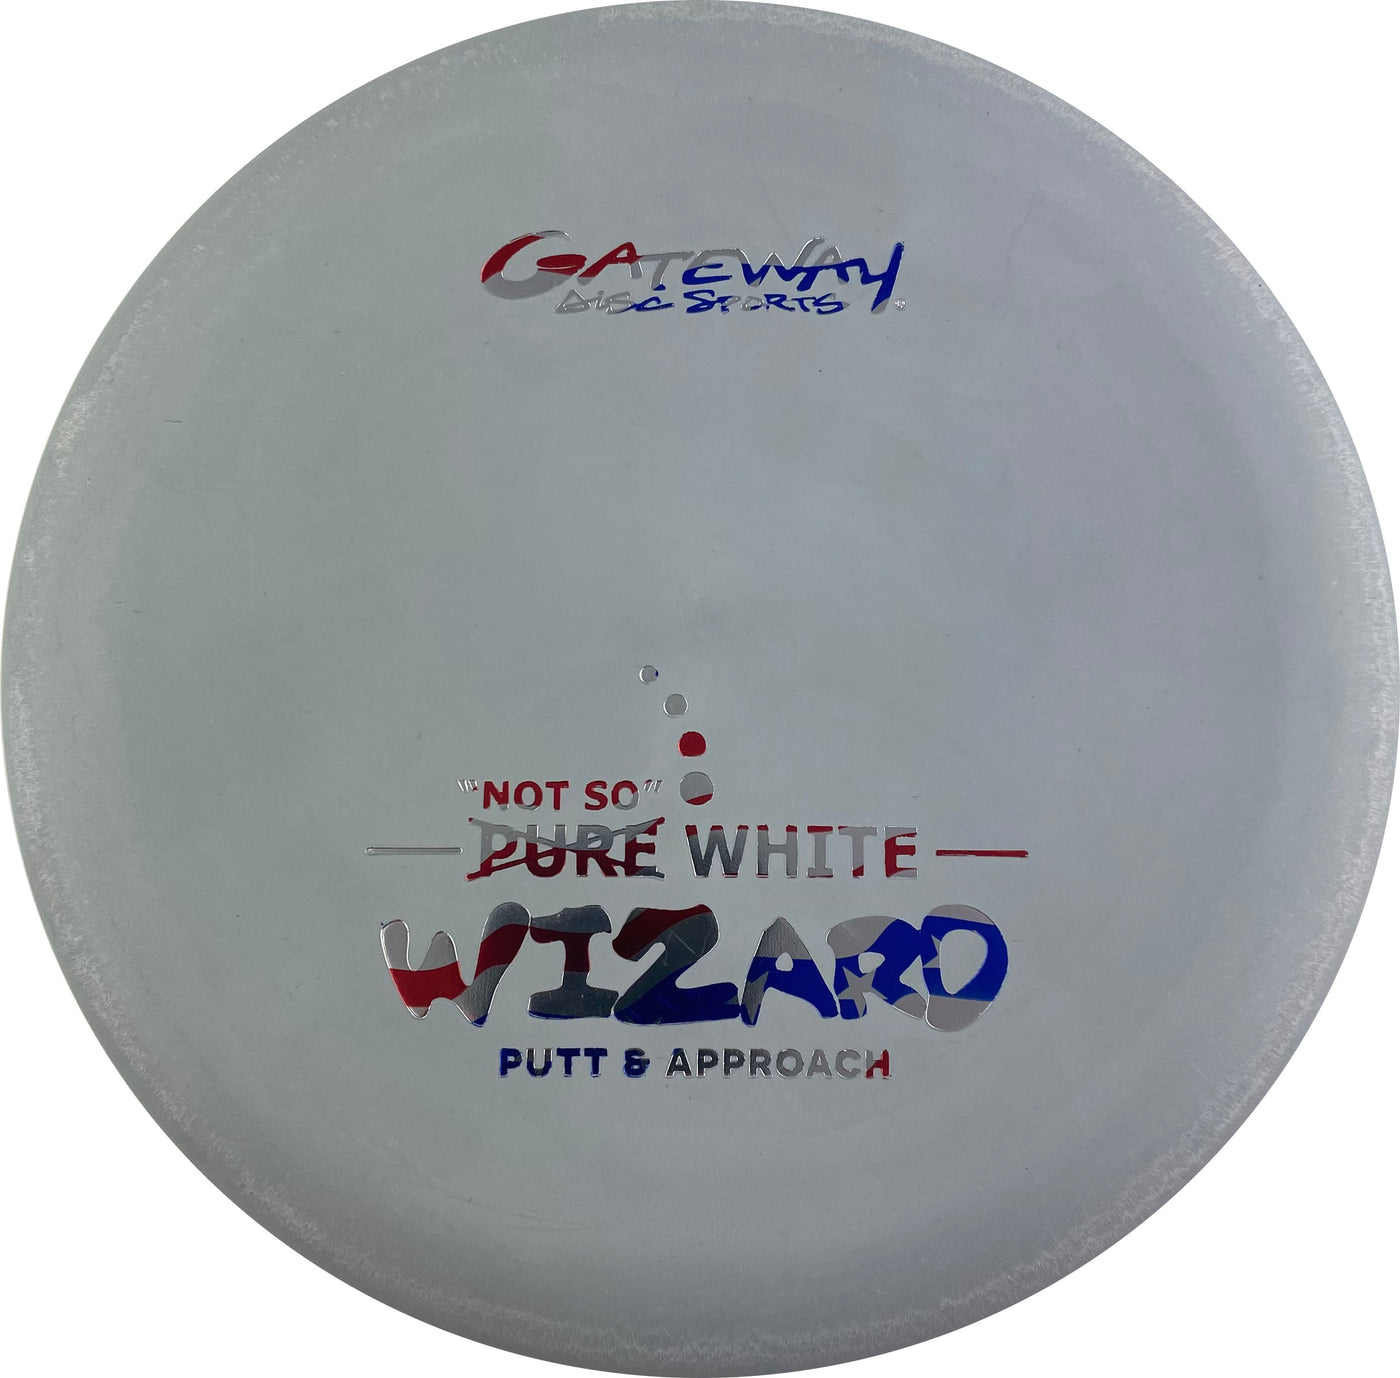 Gateway Pure White Wizard Putter with Not So White Stamp - Speed 2